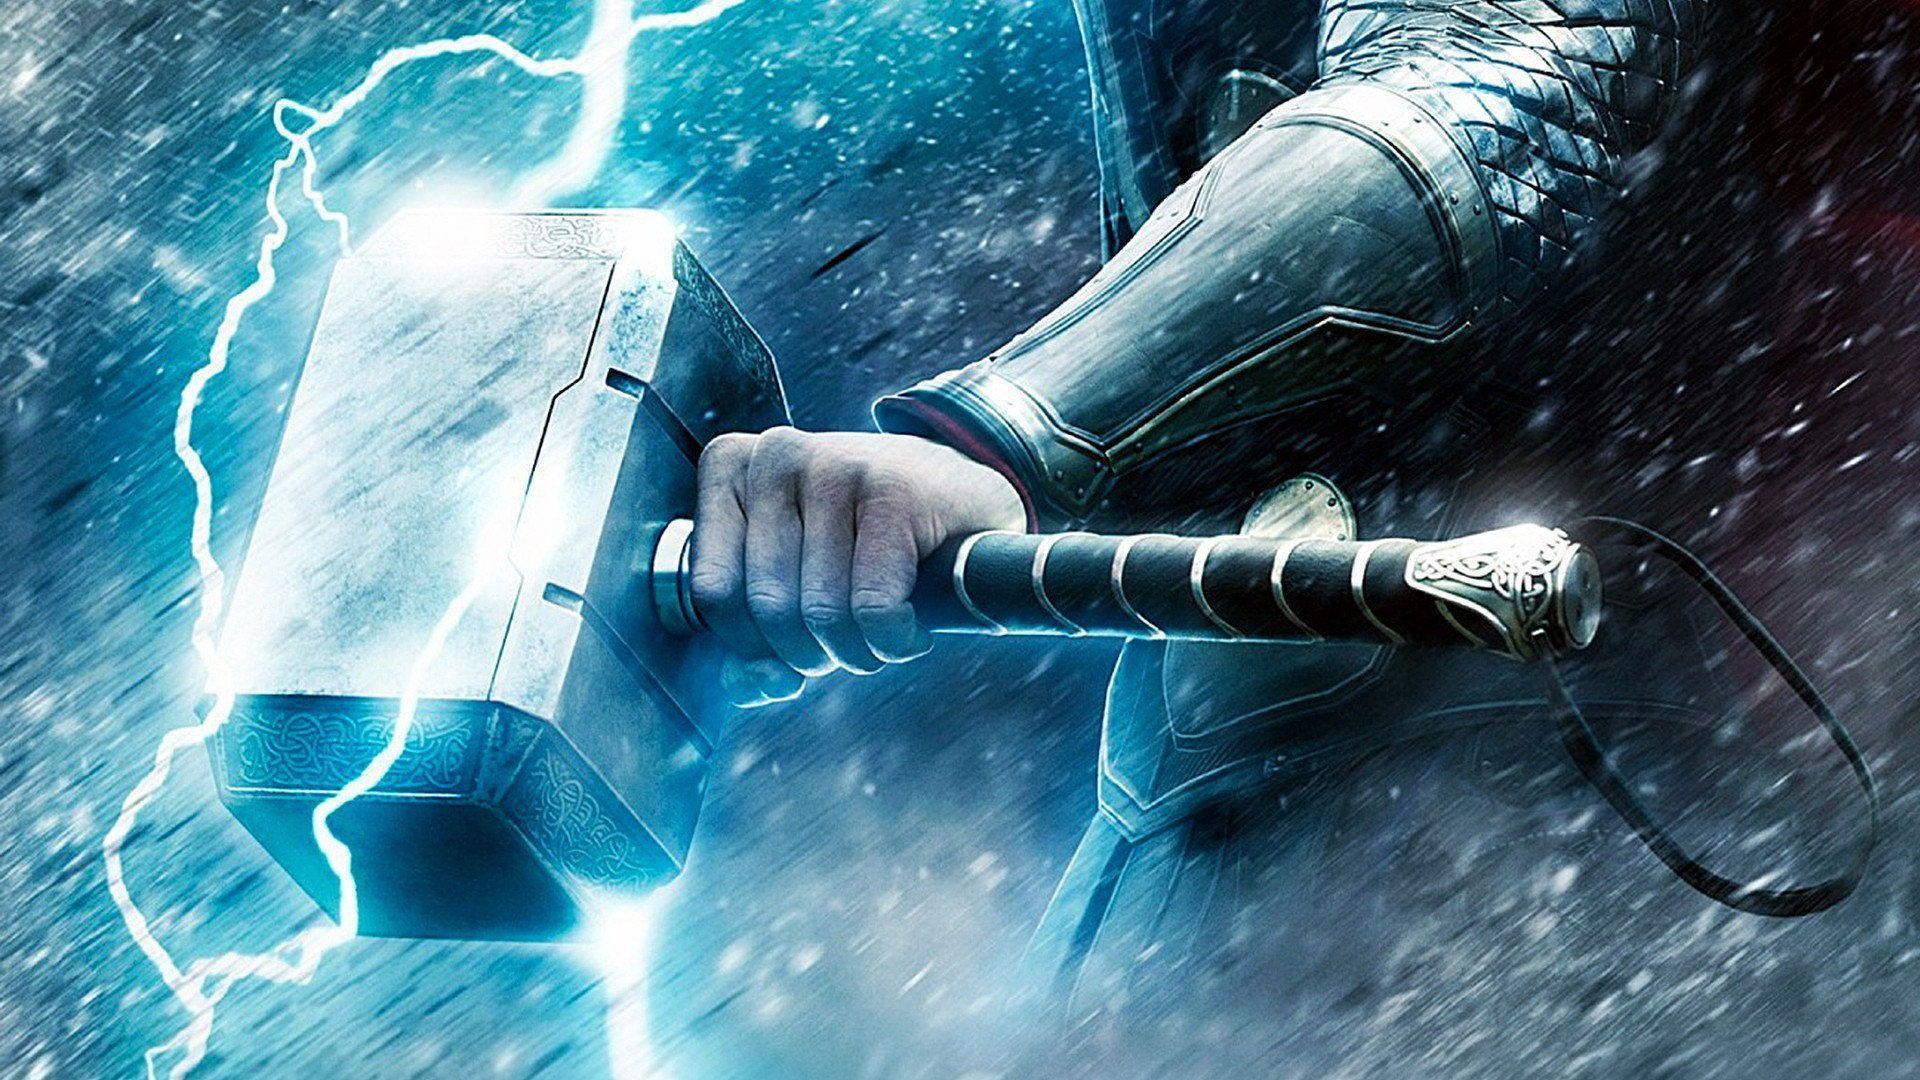 Wallpapers For – Thor Hammer Wallpapers 2K p